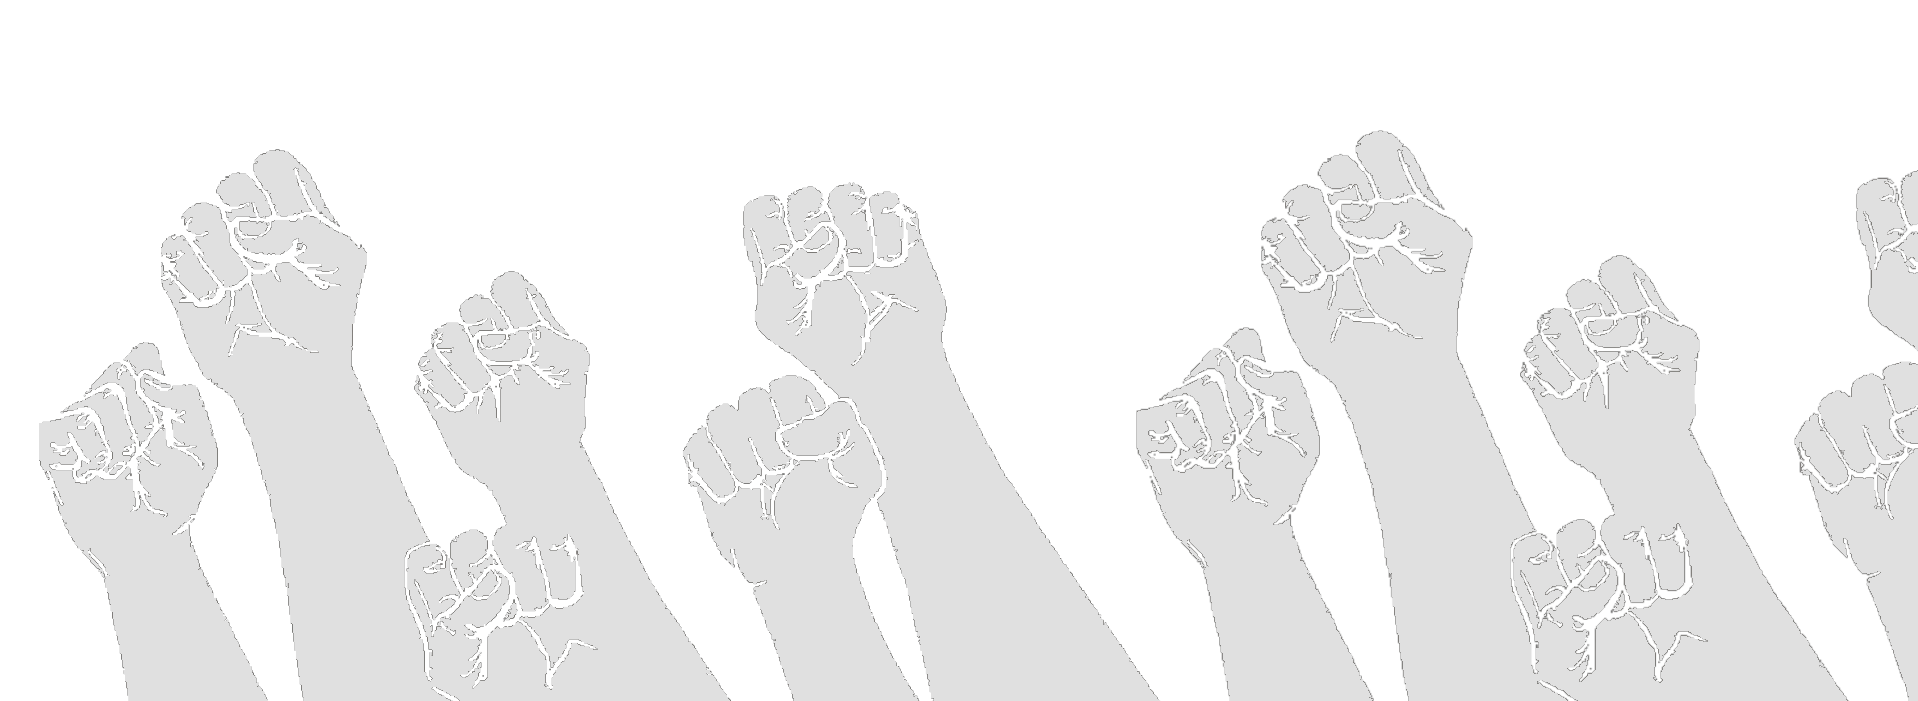 image of fists